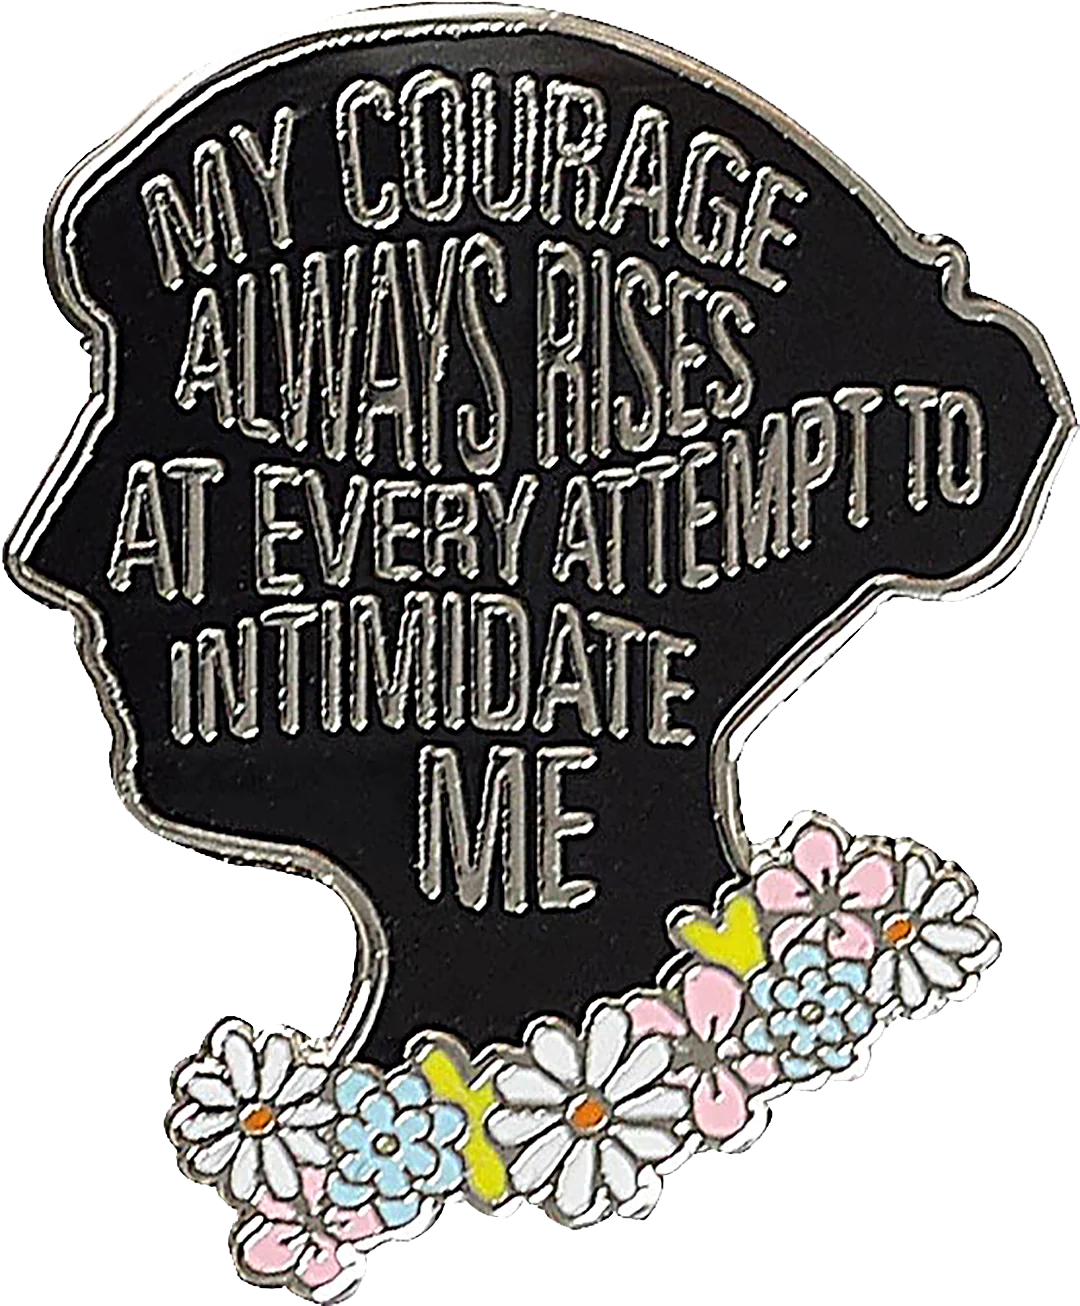 Black profile of Jane Austen with a flower necklace and text that reads "My courage always rises at every attempt to intimidate me"